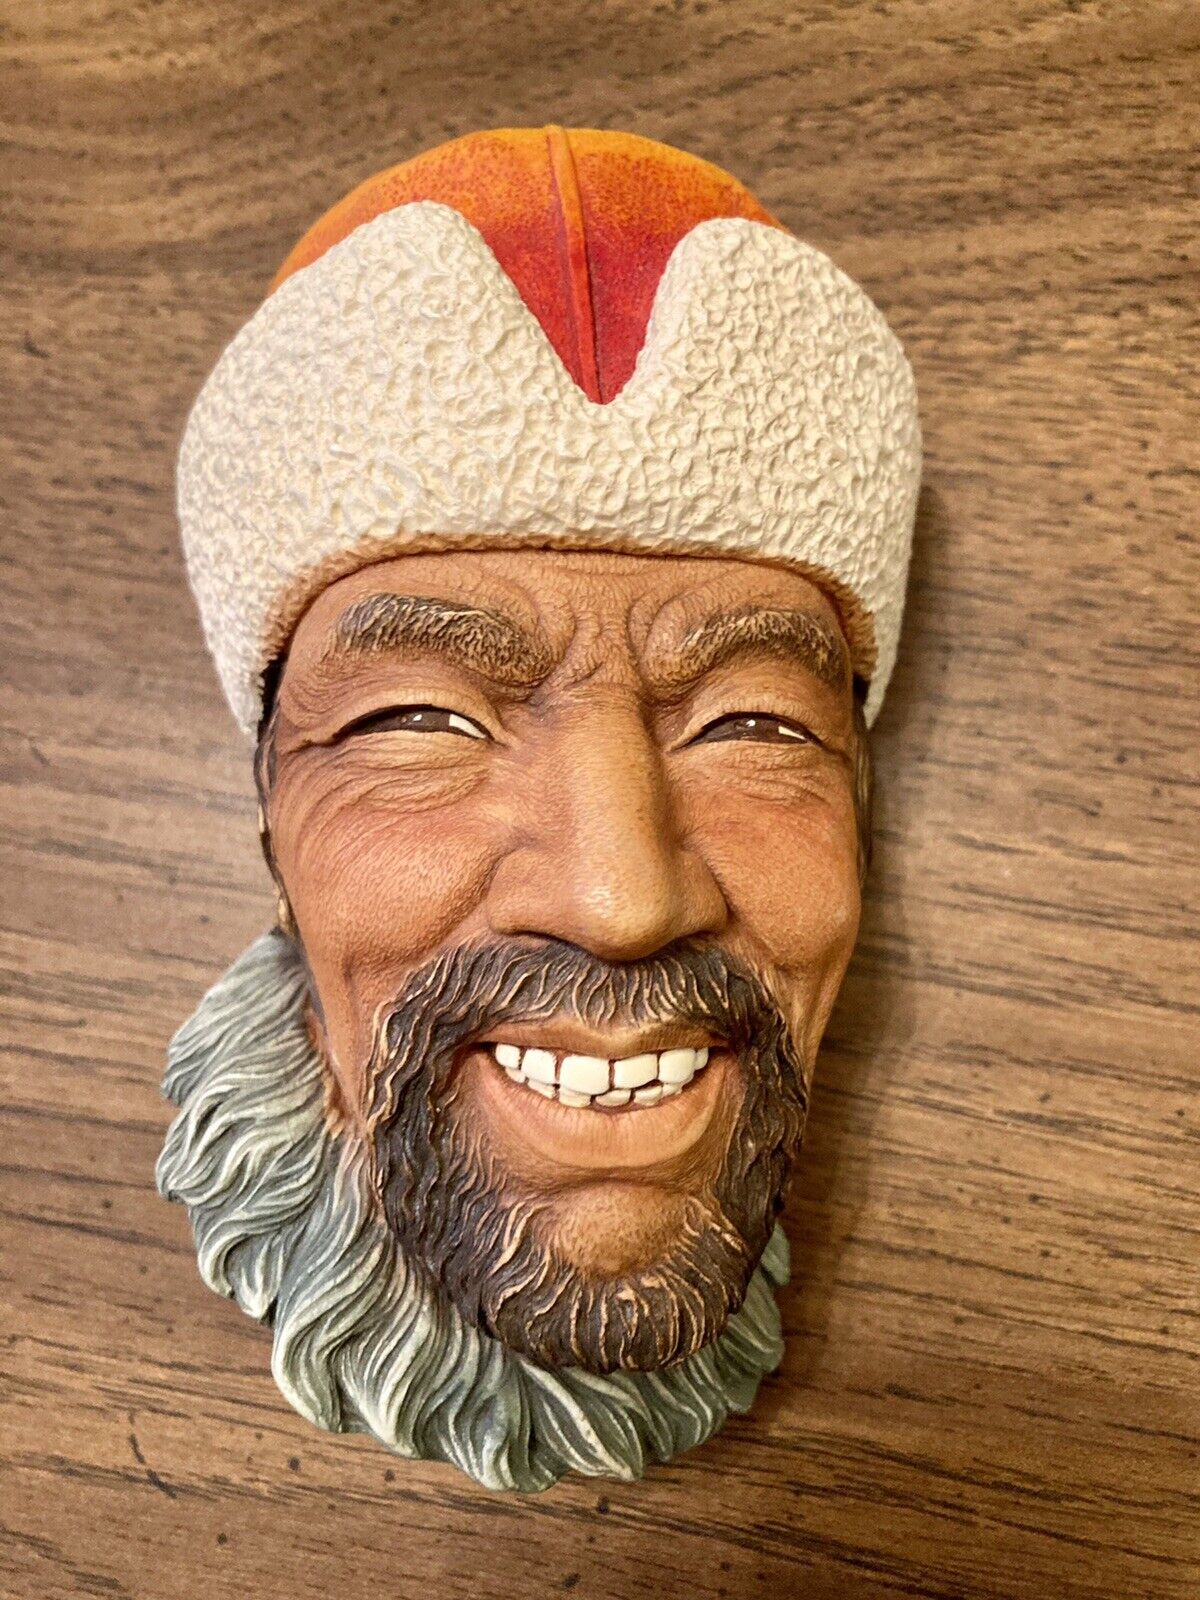 BOSSONS Chalkware Himalayan Sherpa Head Figurine Bust VTG 1960s Collectable Mint